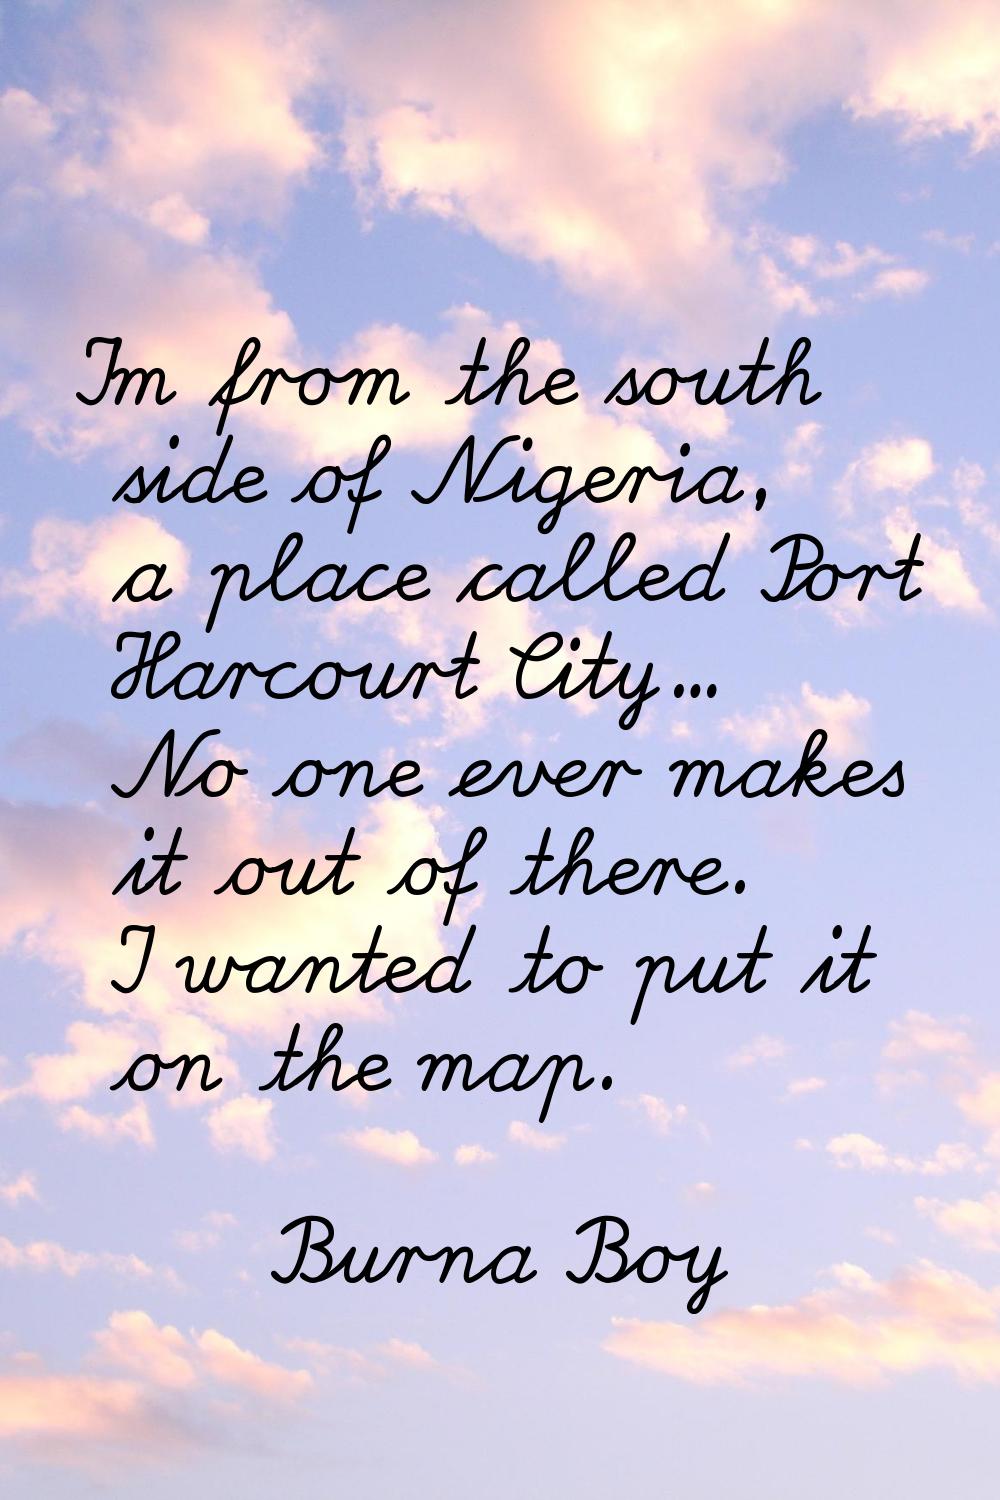 I'm from the south side of Nigeria, a place called Port Harcourt City... No one ever makes it out o